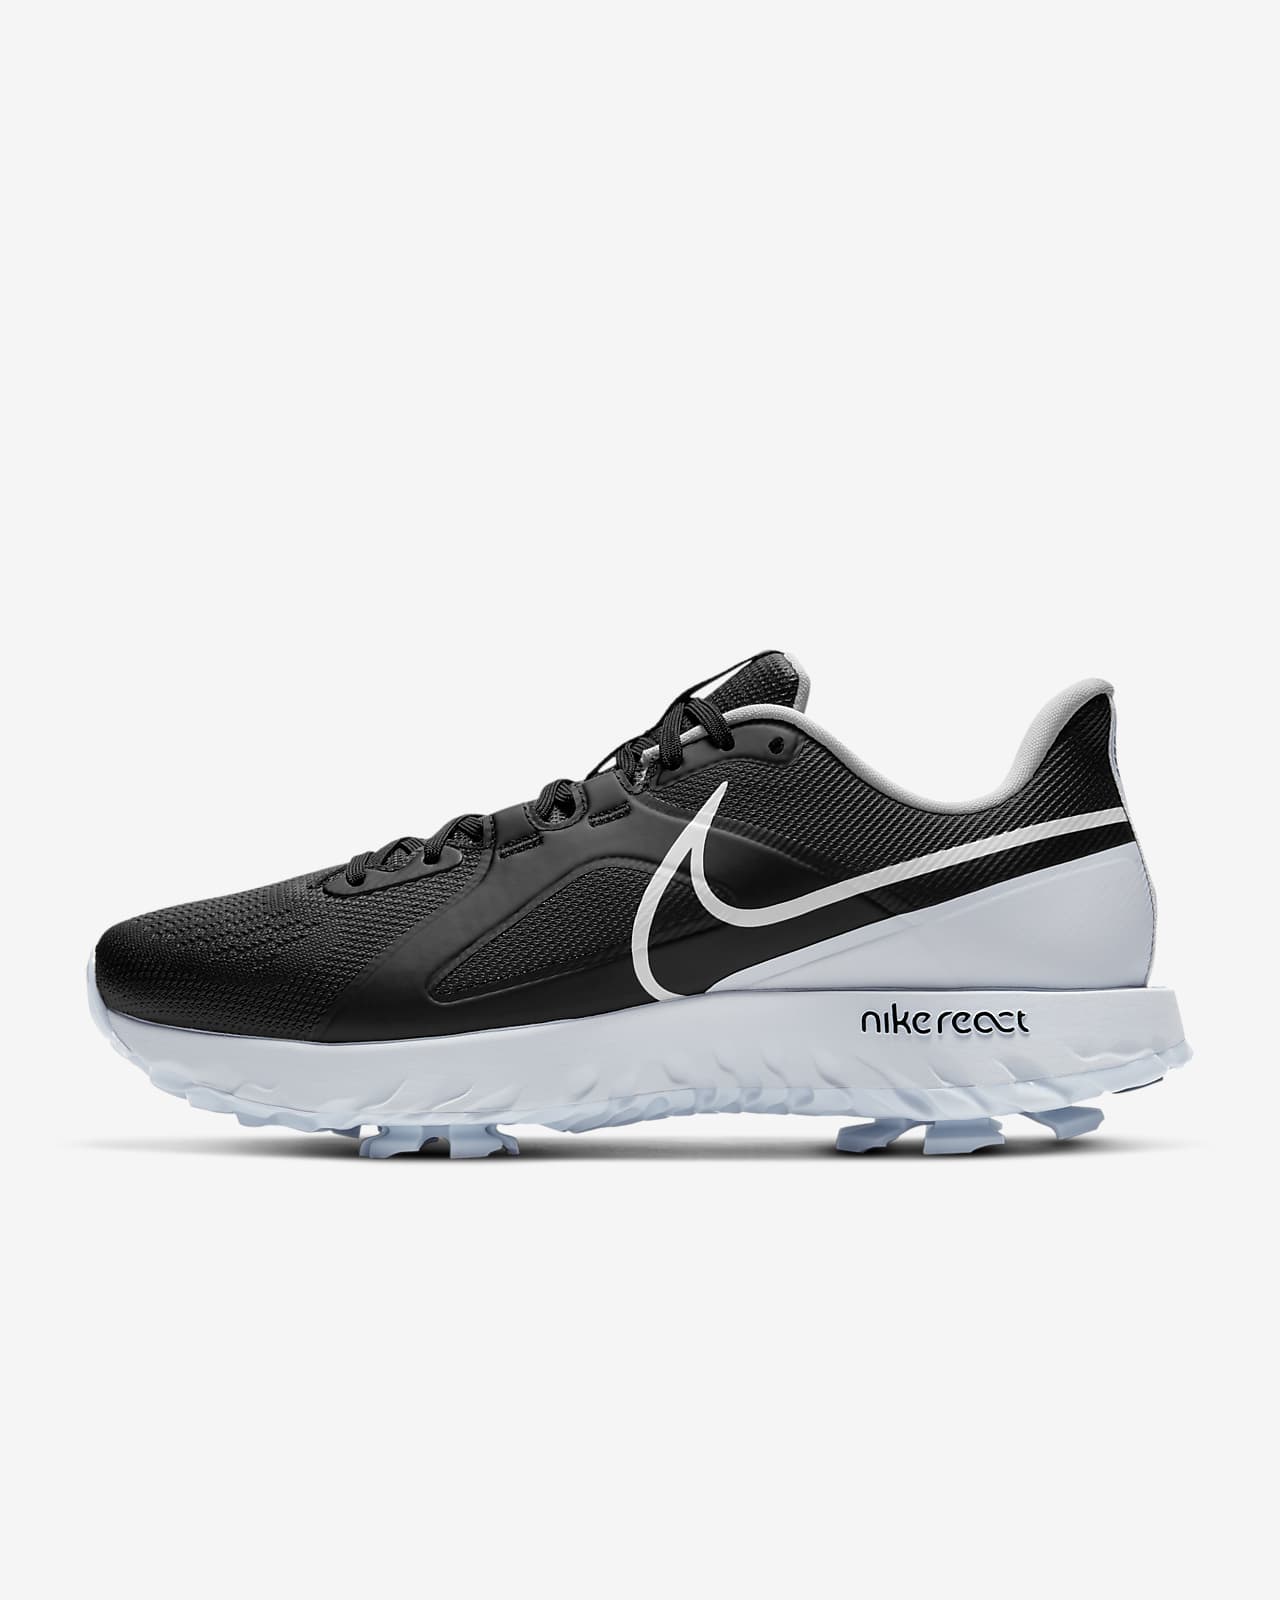 nike react golf shoes review